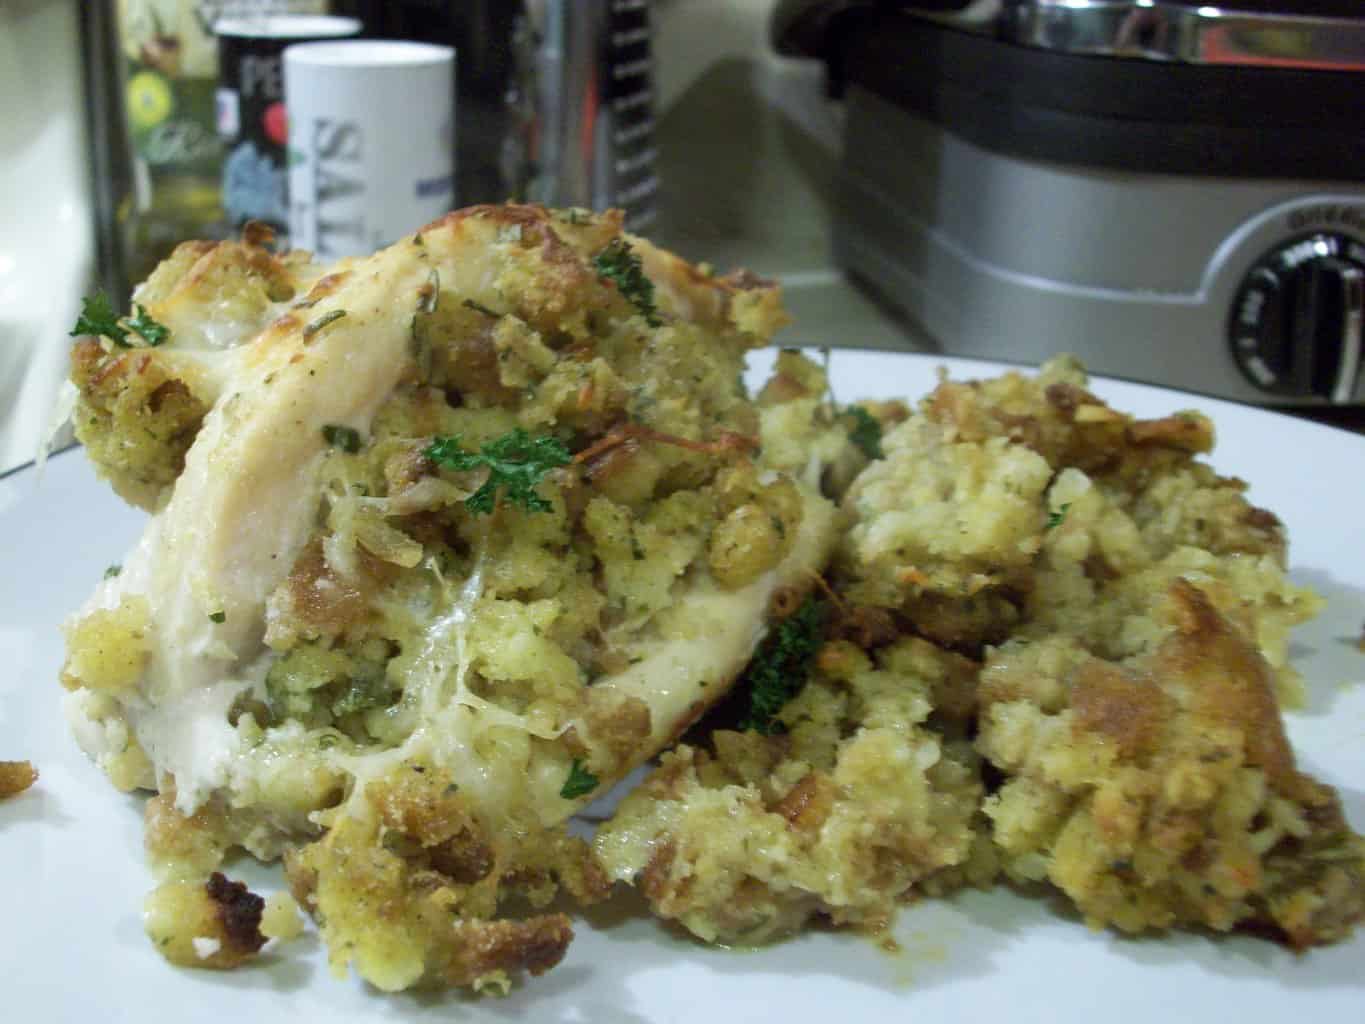 Southern Cornbread Stuffed Chicken - Get this easy and delicious dinner recipe from PassTheSushi.com